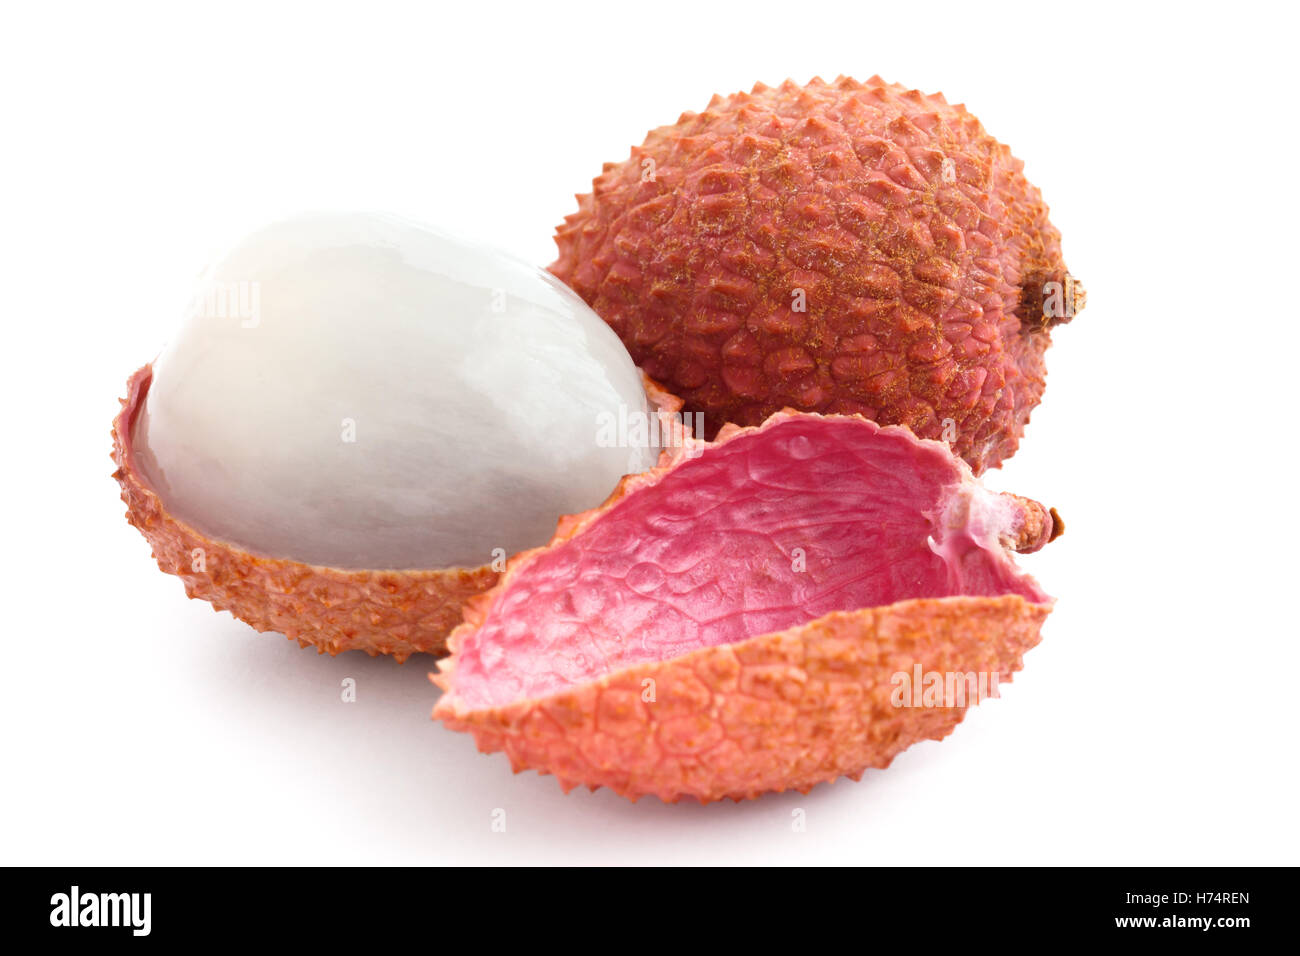 Single litchi with skin removed and flesh. On white. Stock Photo